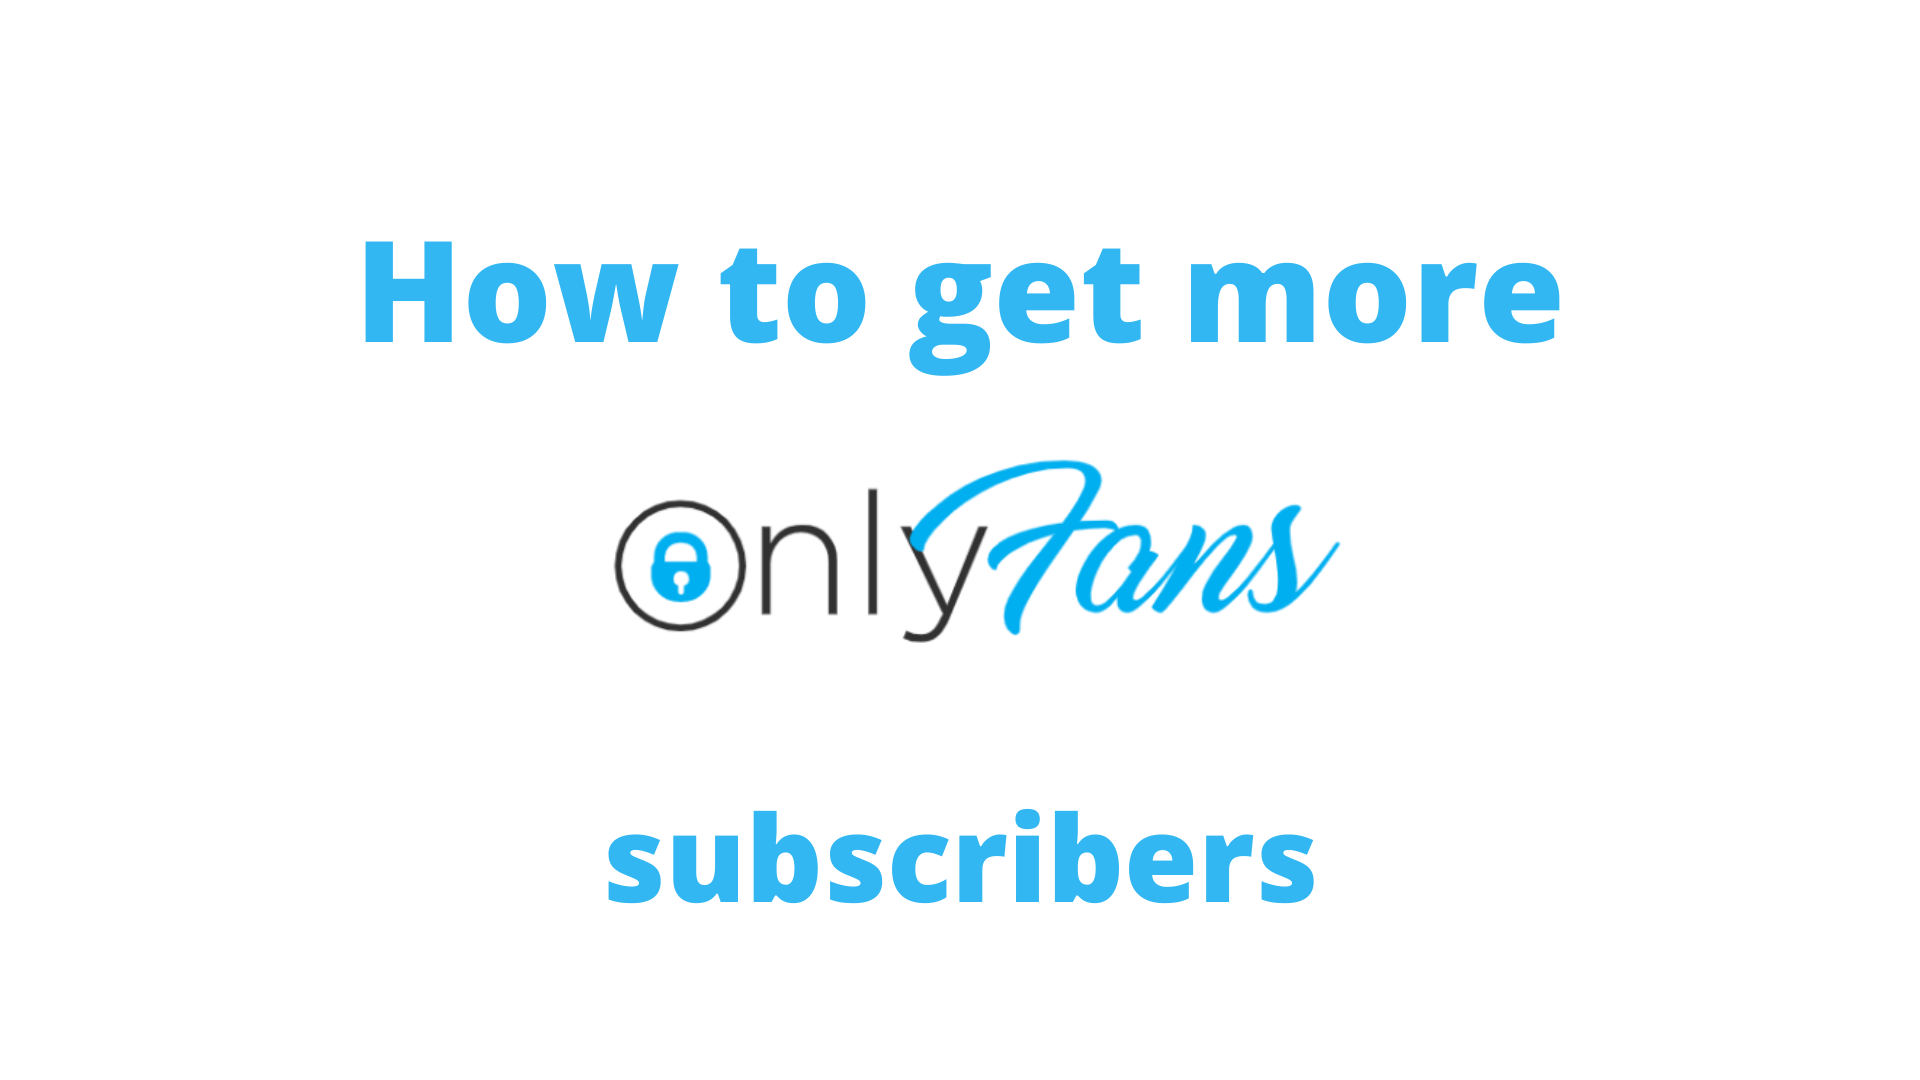 On gain onlyfans to subscribers how How to